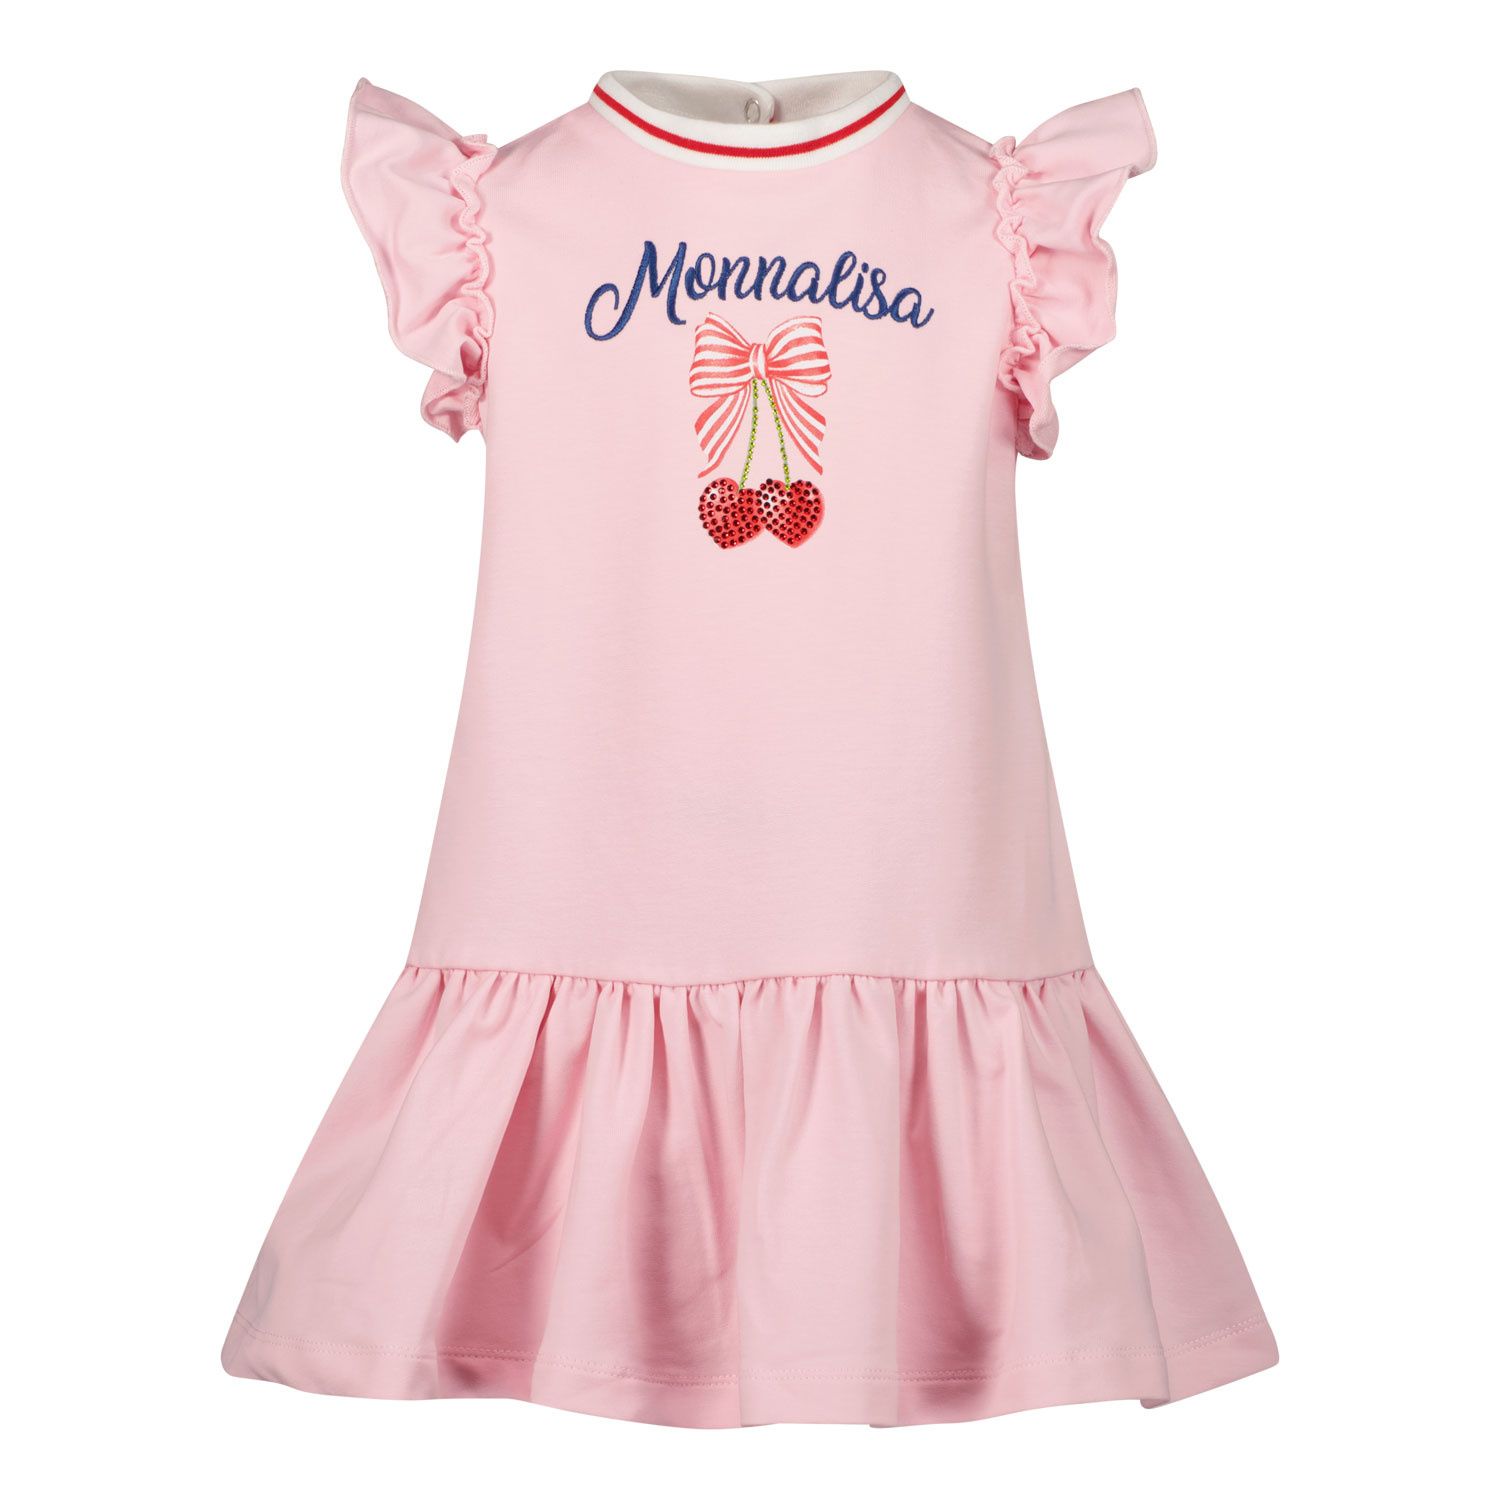 Picture of MonnaLisa 399910 baby dress light pink